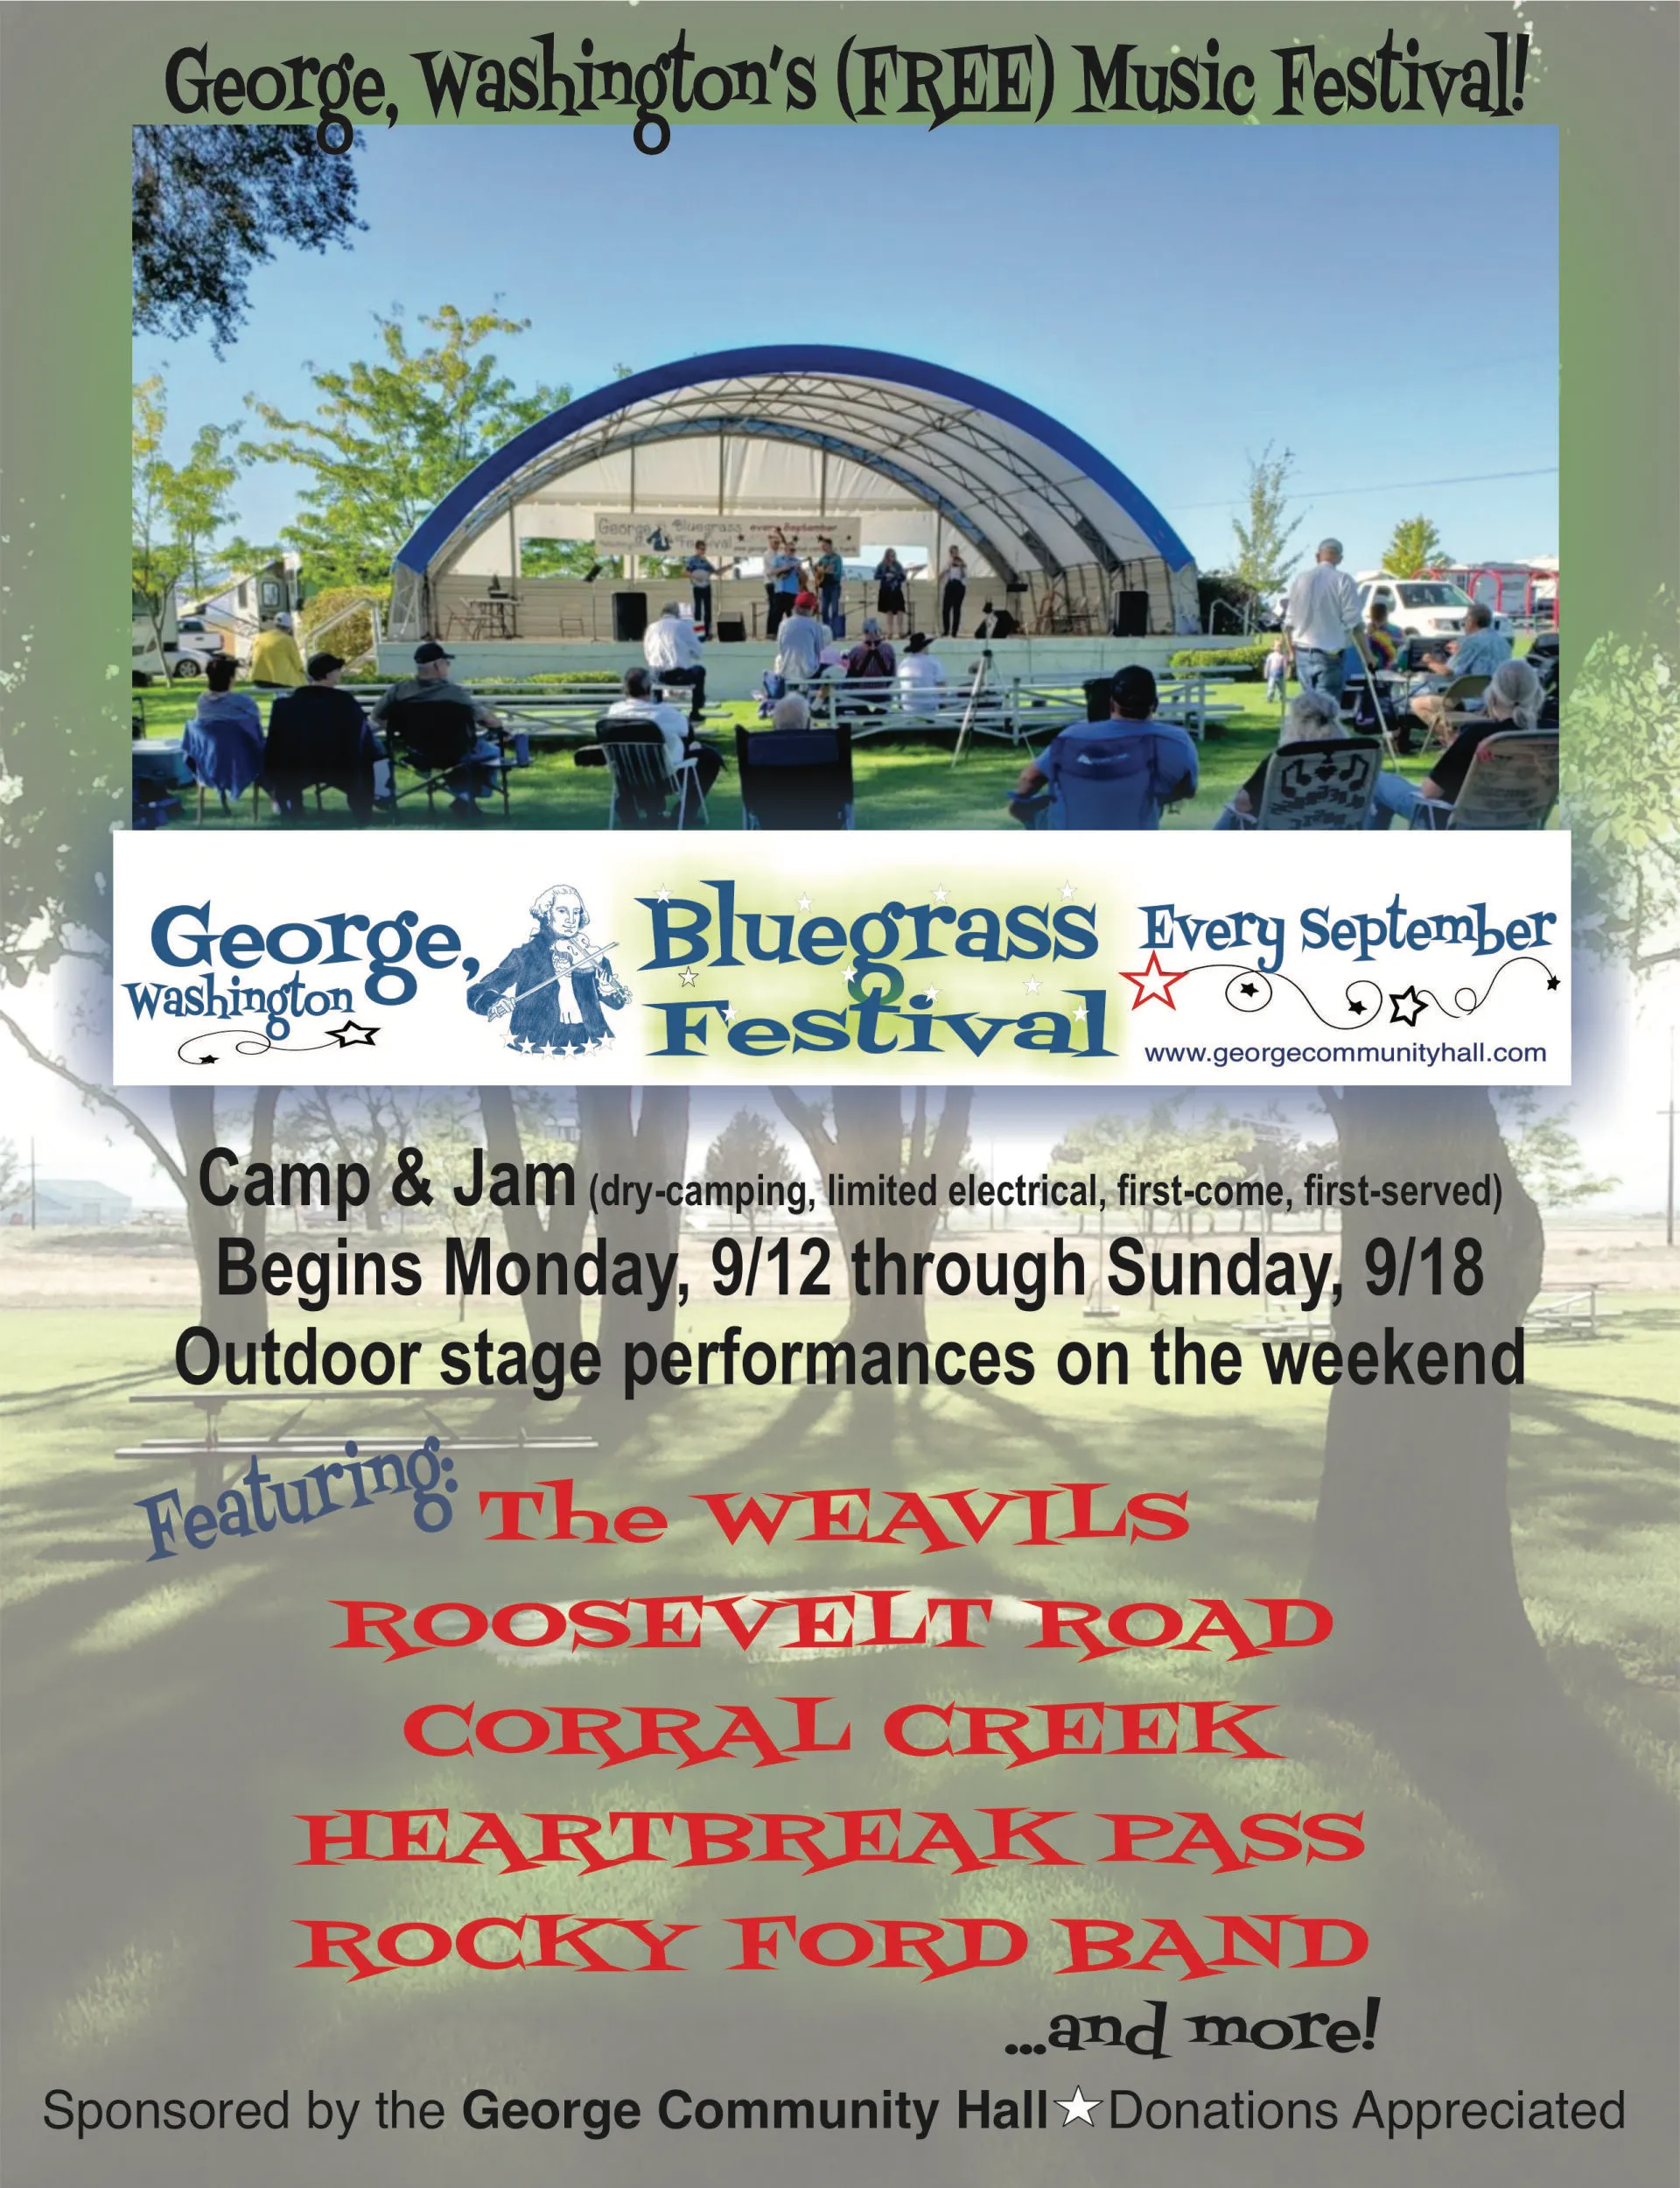 <h1 class="tribe-events-single-event-title">The 15th Annual George, Washington Bluegrass Festival</h1>